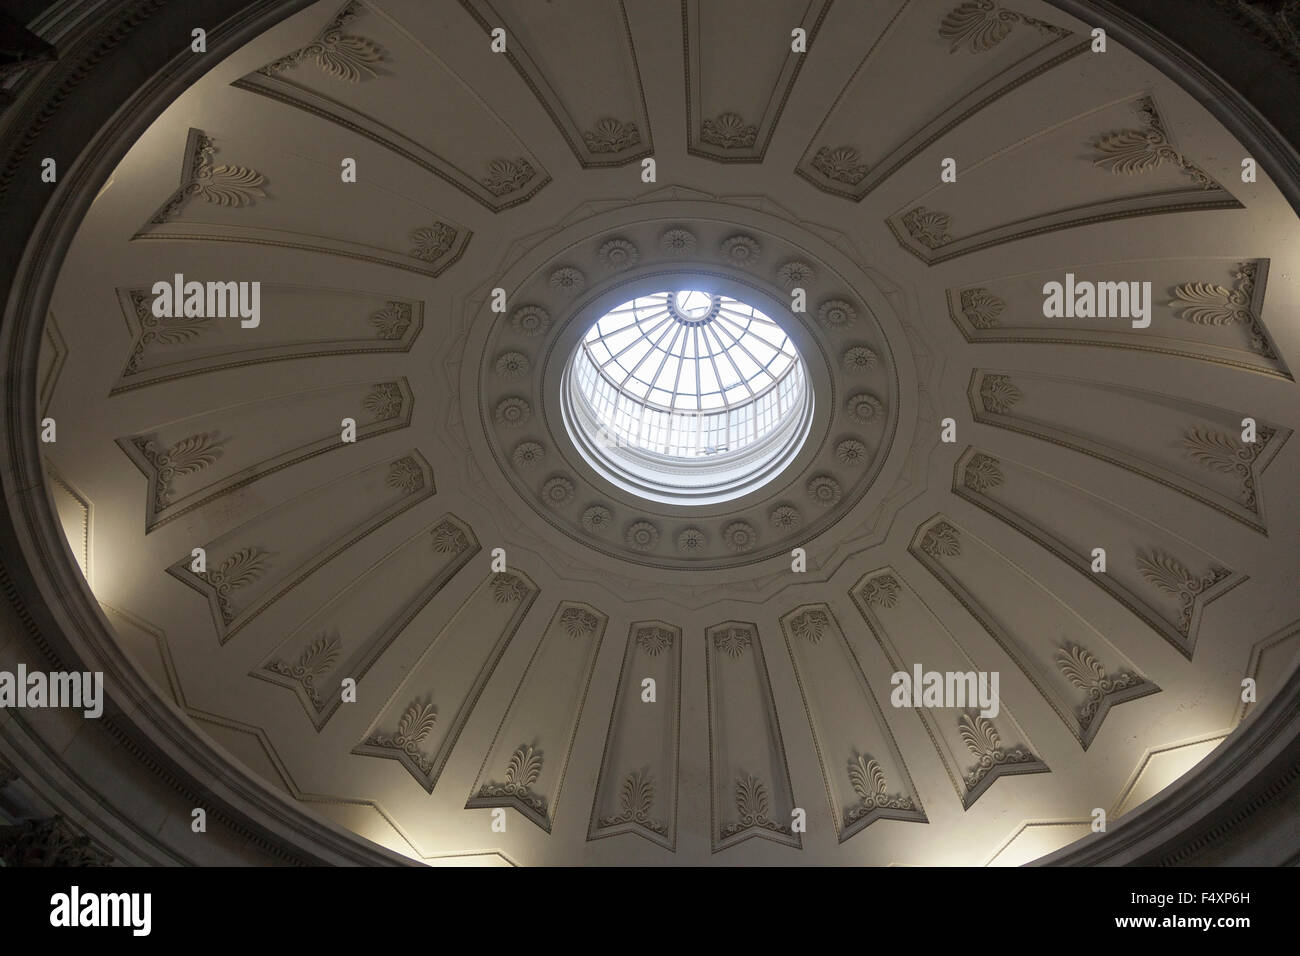 ceiling of federal hall in new york lower manhattan Stock Photo